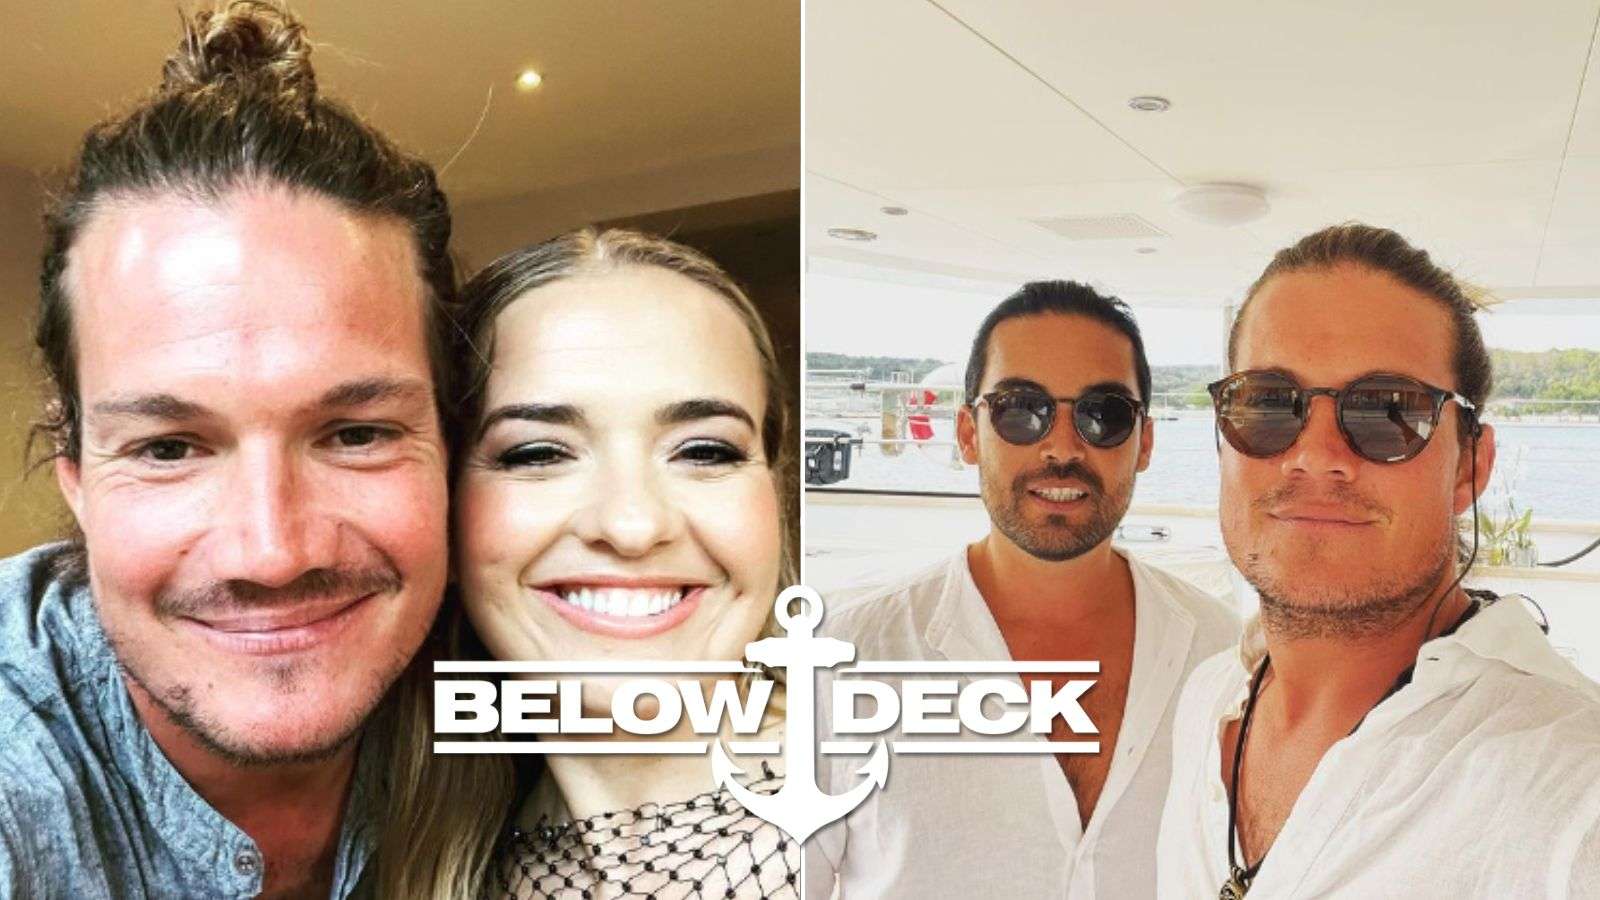 Gary, Daisy, and Colin from Below Deck Sailing Yacht